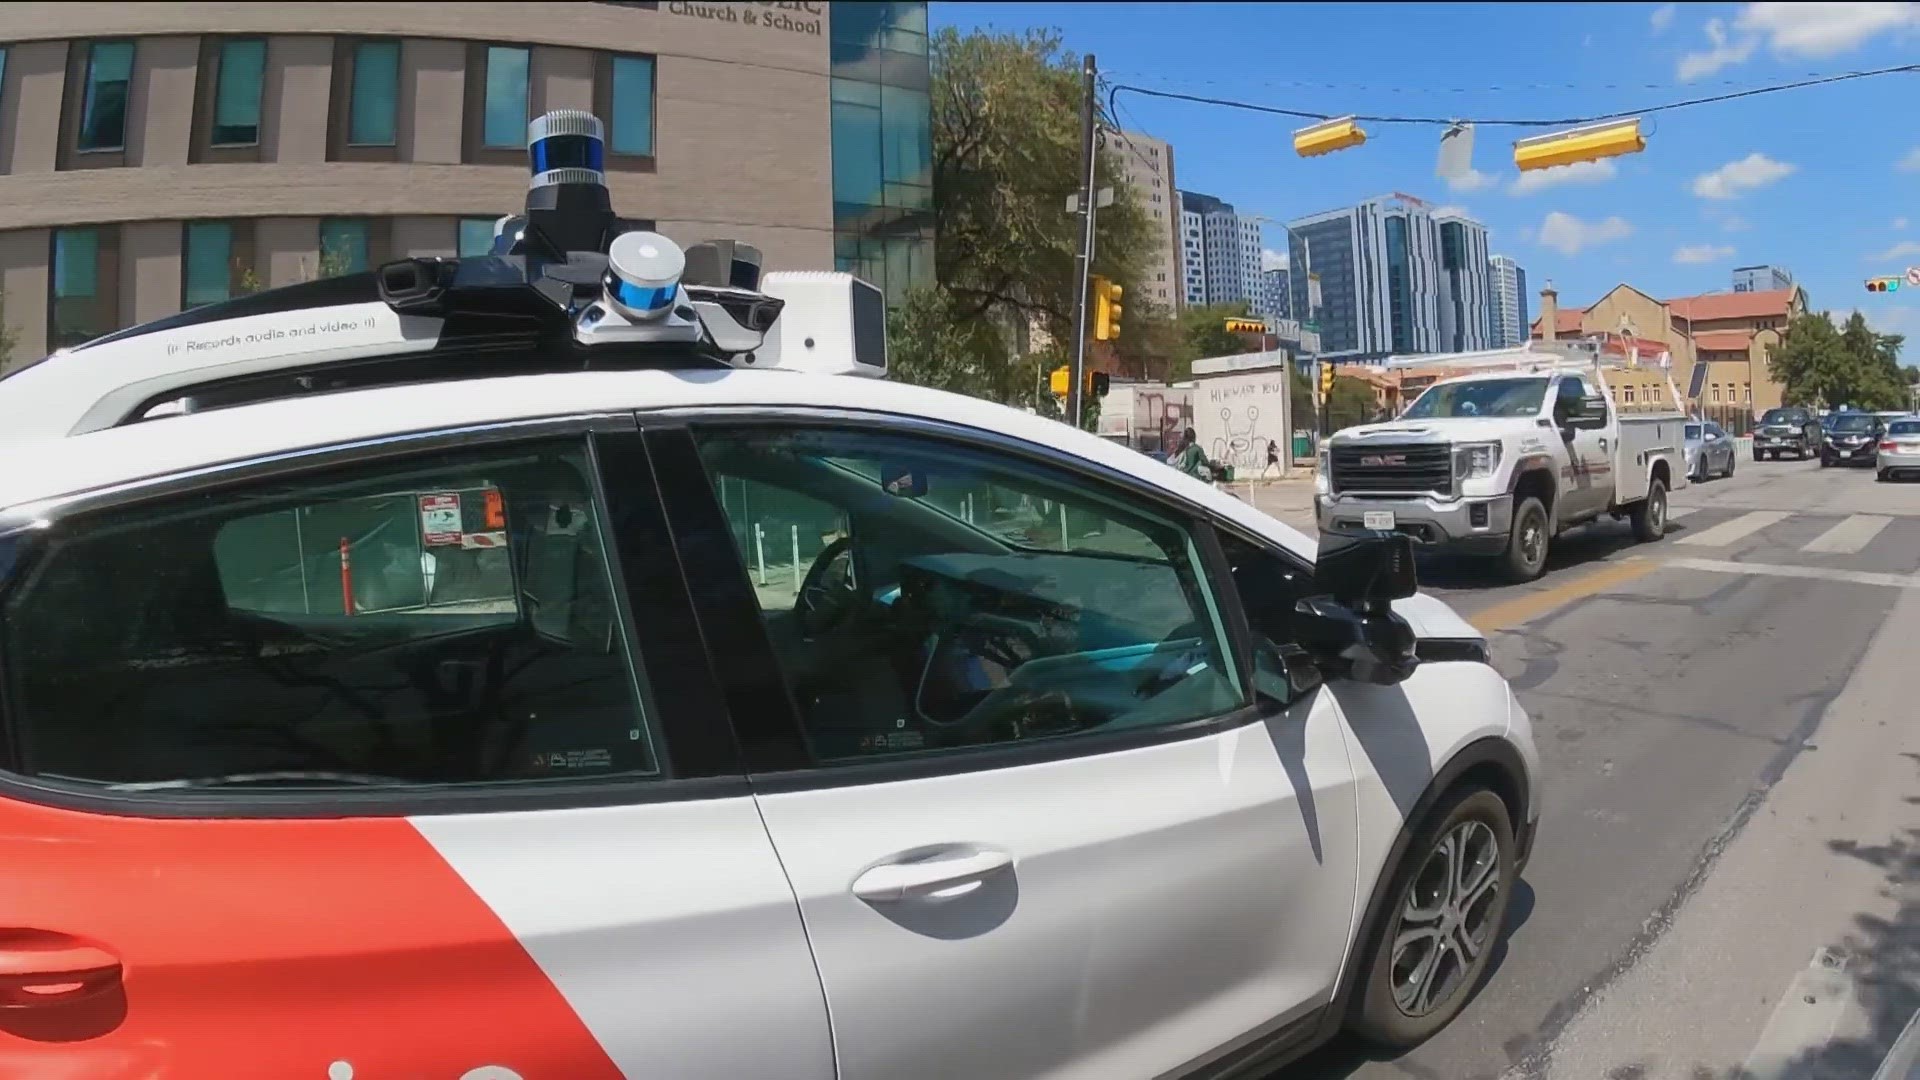 More complaints are rolling in about driverless cars causing traffic issues in Downtown Austin. One Austin council member is raising concerns.